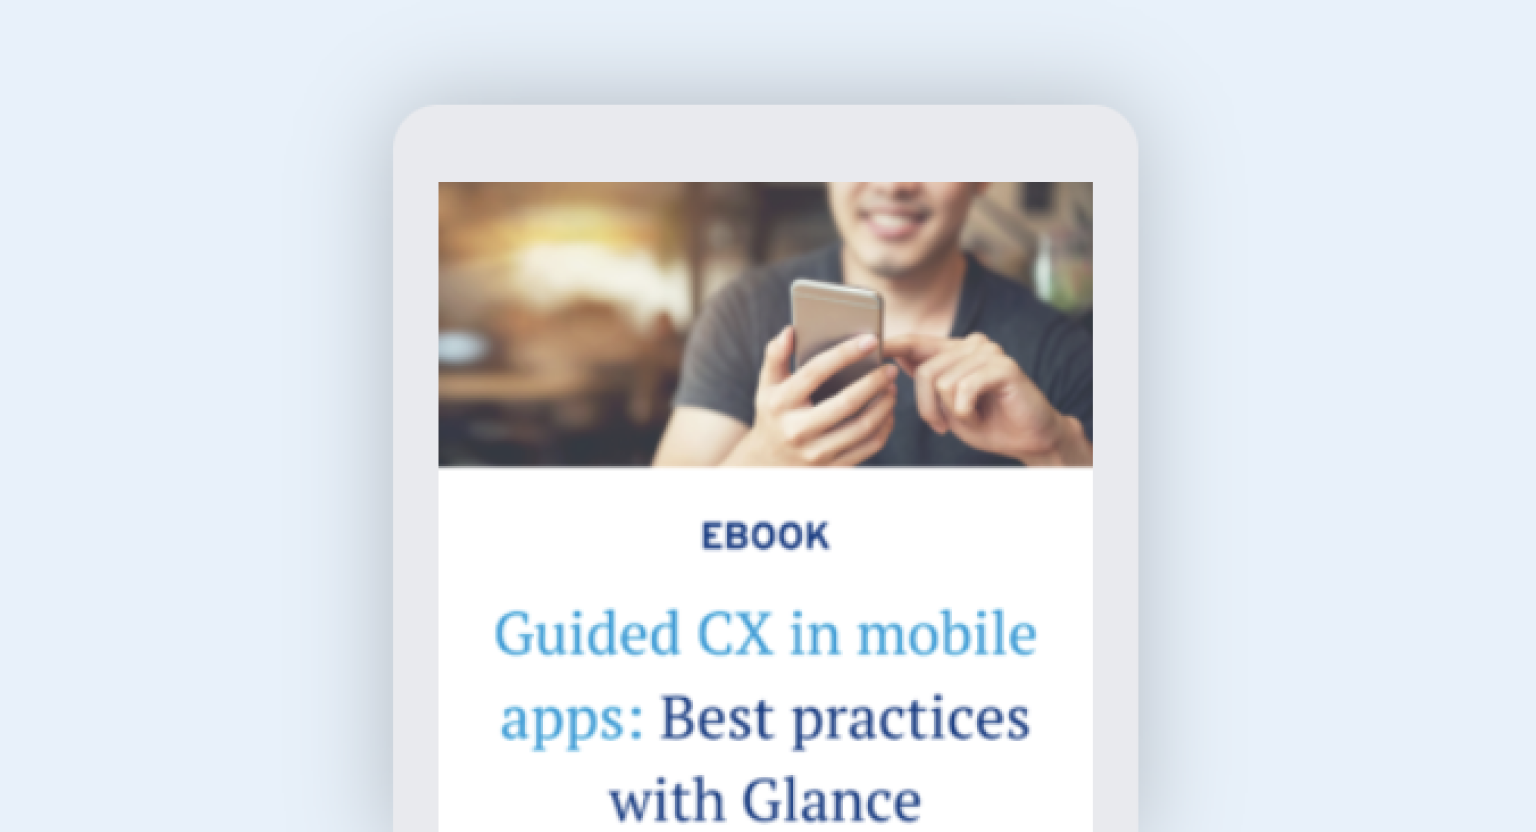 Guided CX in mobile apps: Best practices with Glance